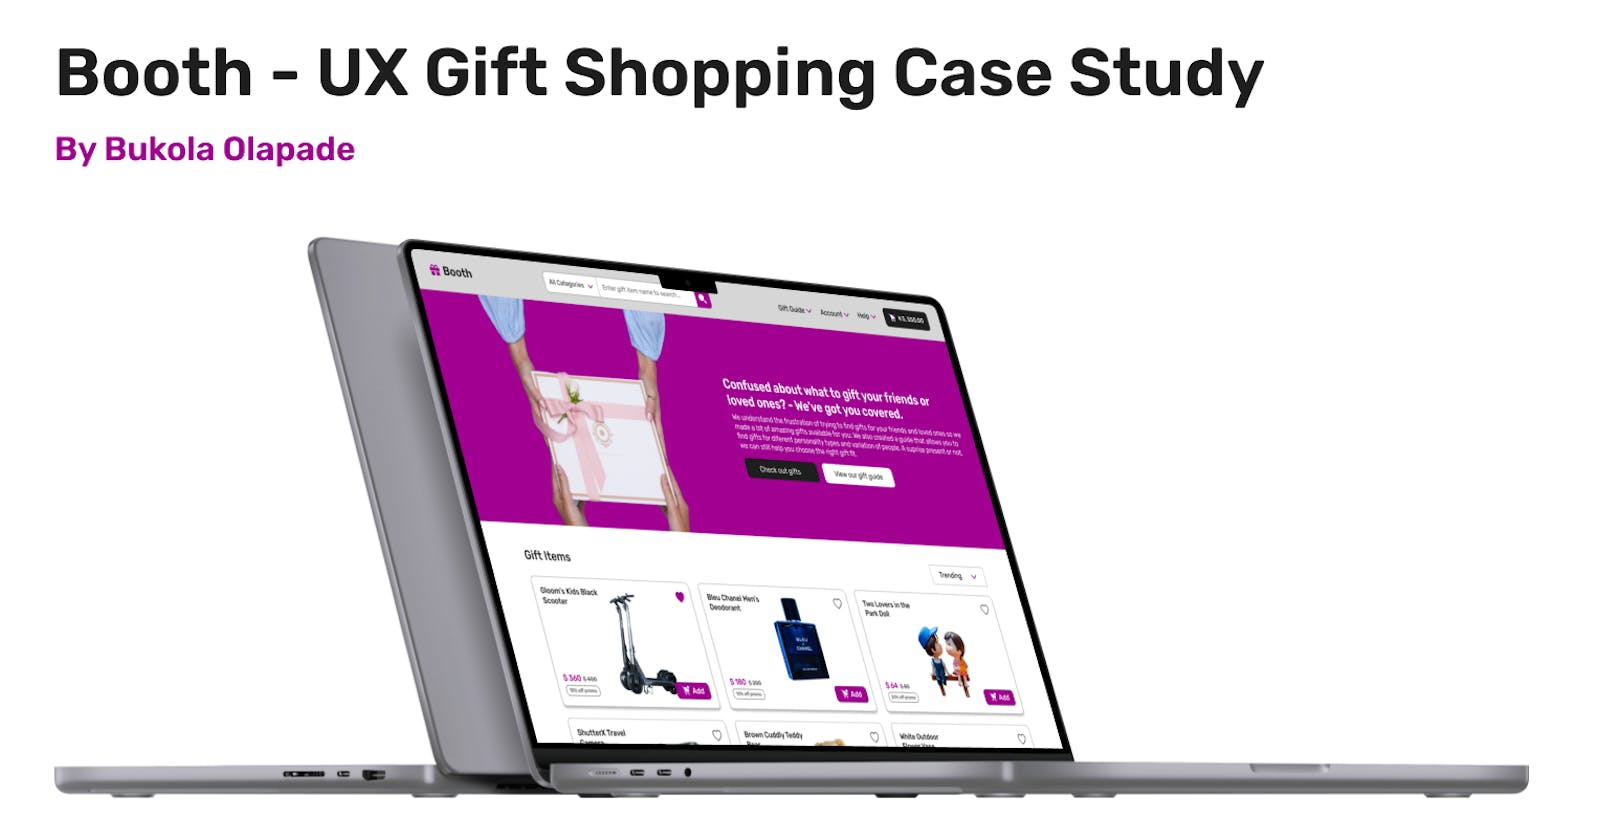 Booth - UX Gift Shopping Case Study